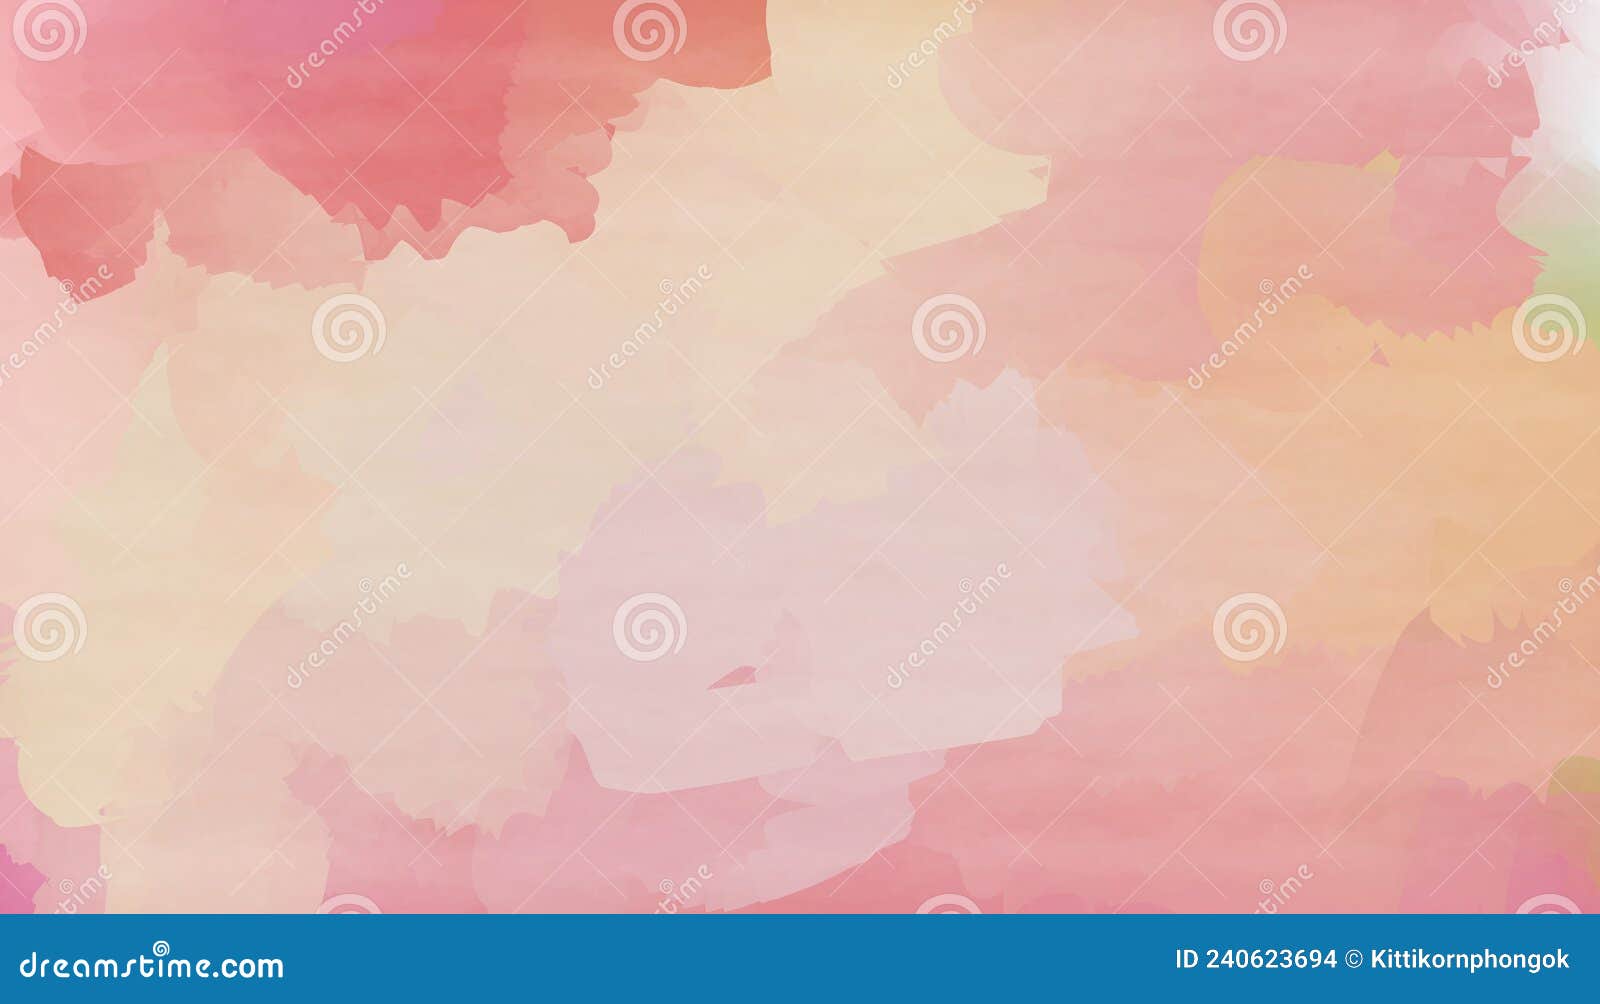 Abstract Colorful Watercolor for Background. Pastel Mesh Background ...